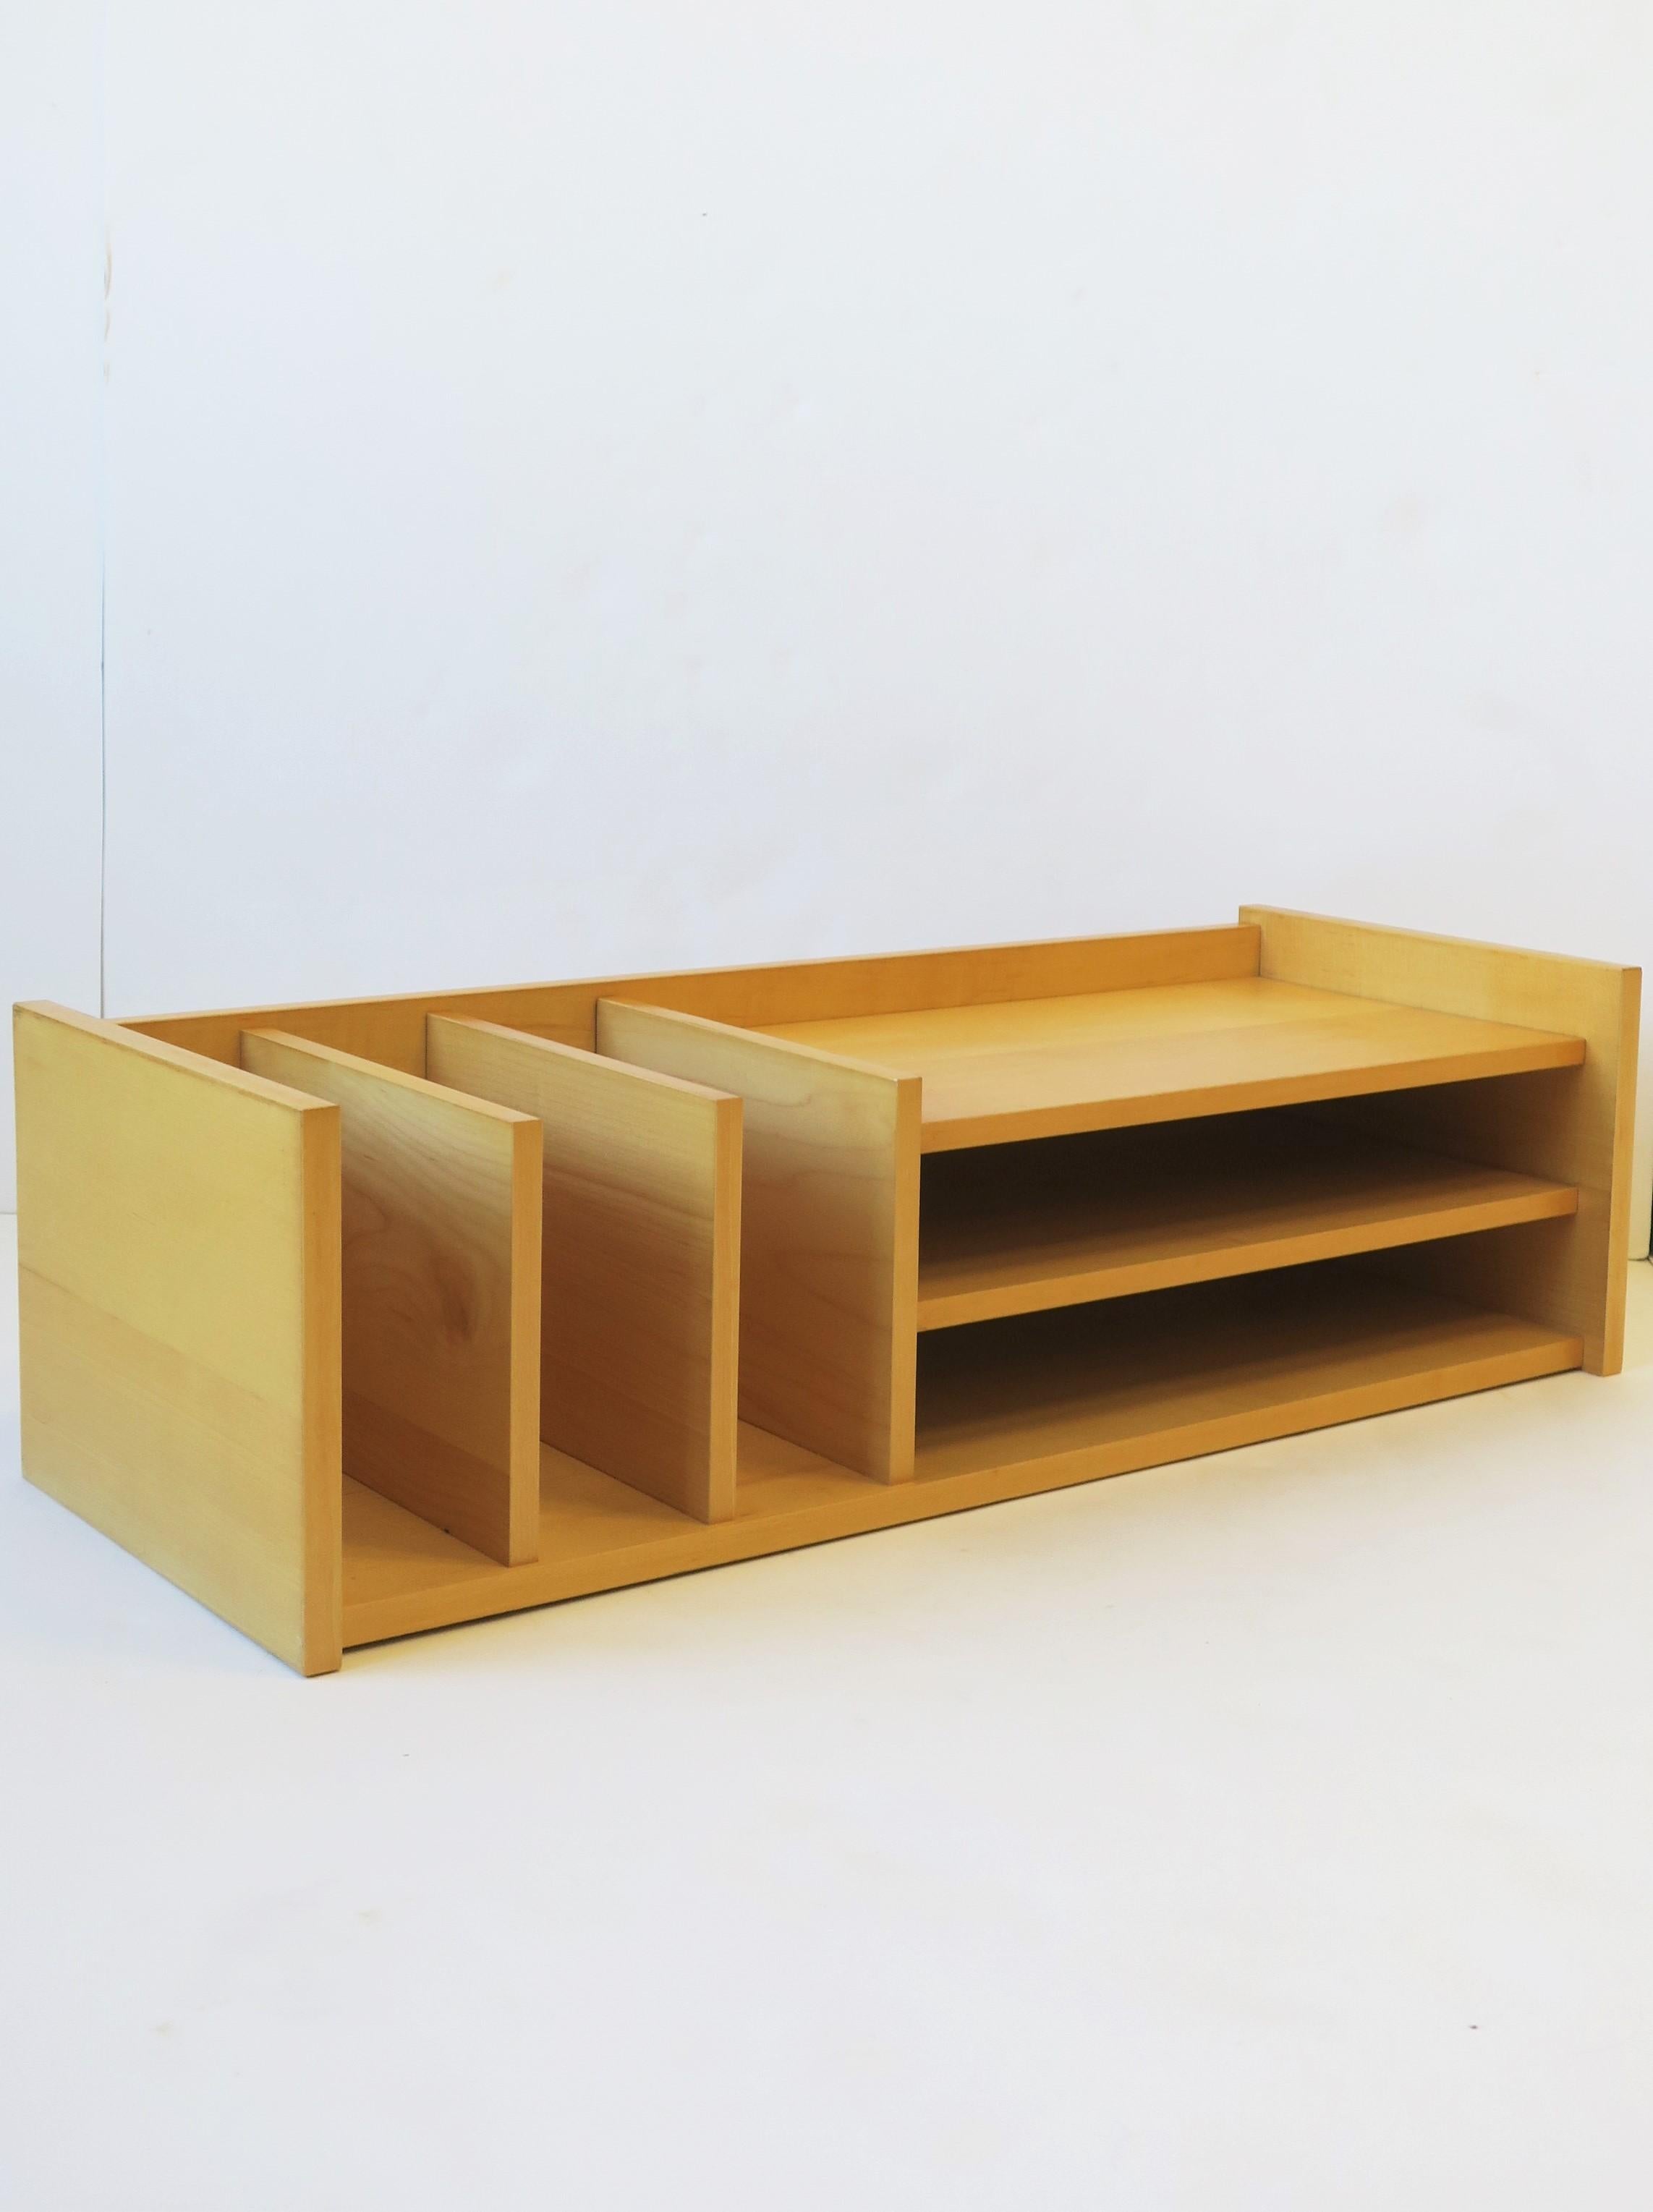 Danish Oak Desk Office Organizer with Shelves In Good Condition For Sale In New York, NY